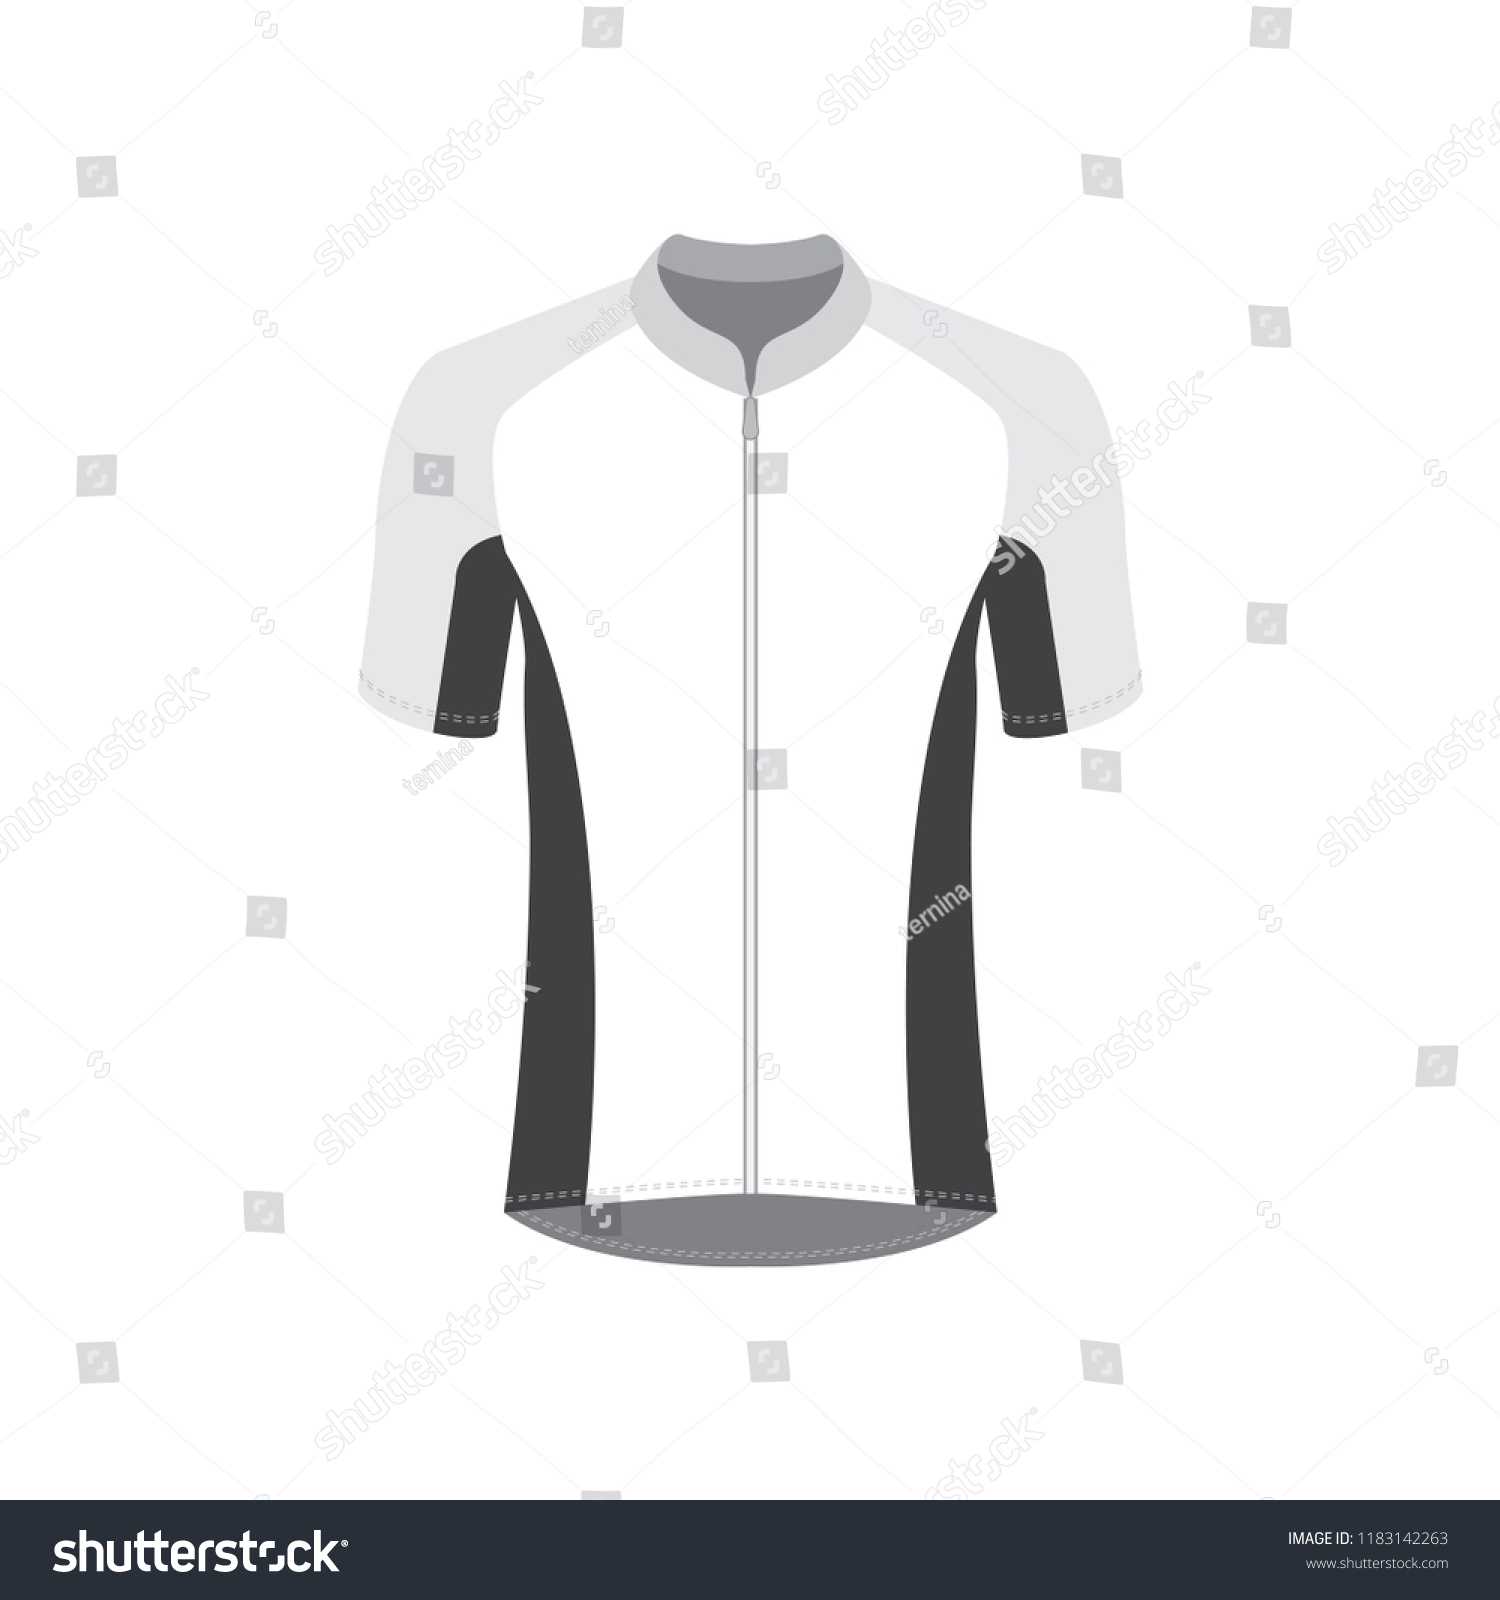 Bike Jersey Mockup Images, Stock Photos & Vectors | Shutterstock Pertaining To Blank Cycling Jersey Template